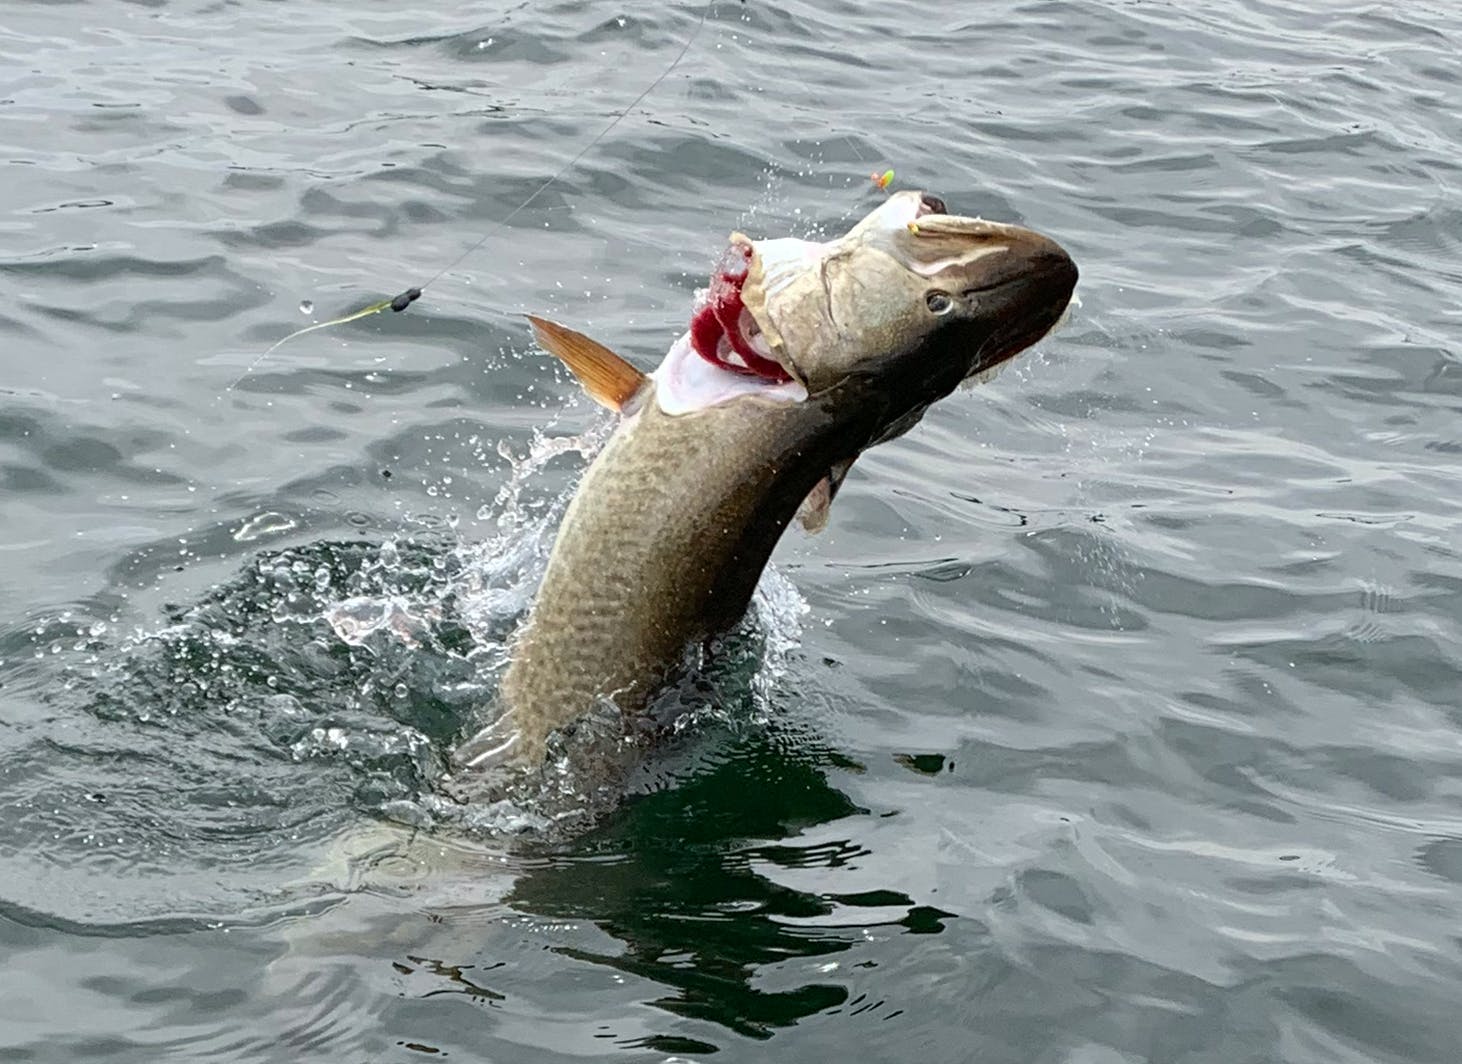 Minnesota Angler Hooks Walleye and Muskie on the Same Bait With One Cast